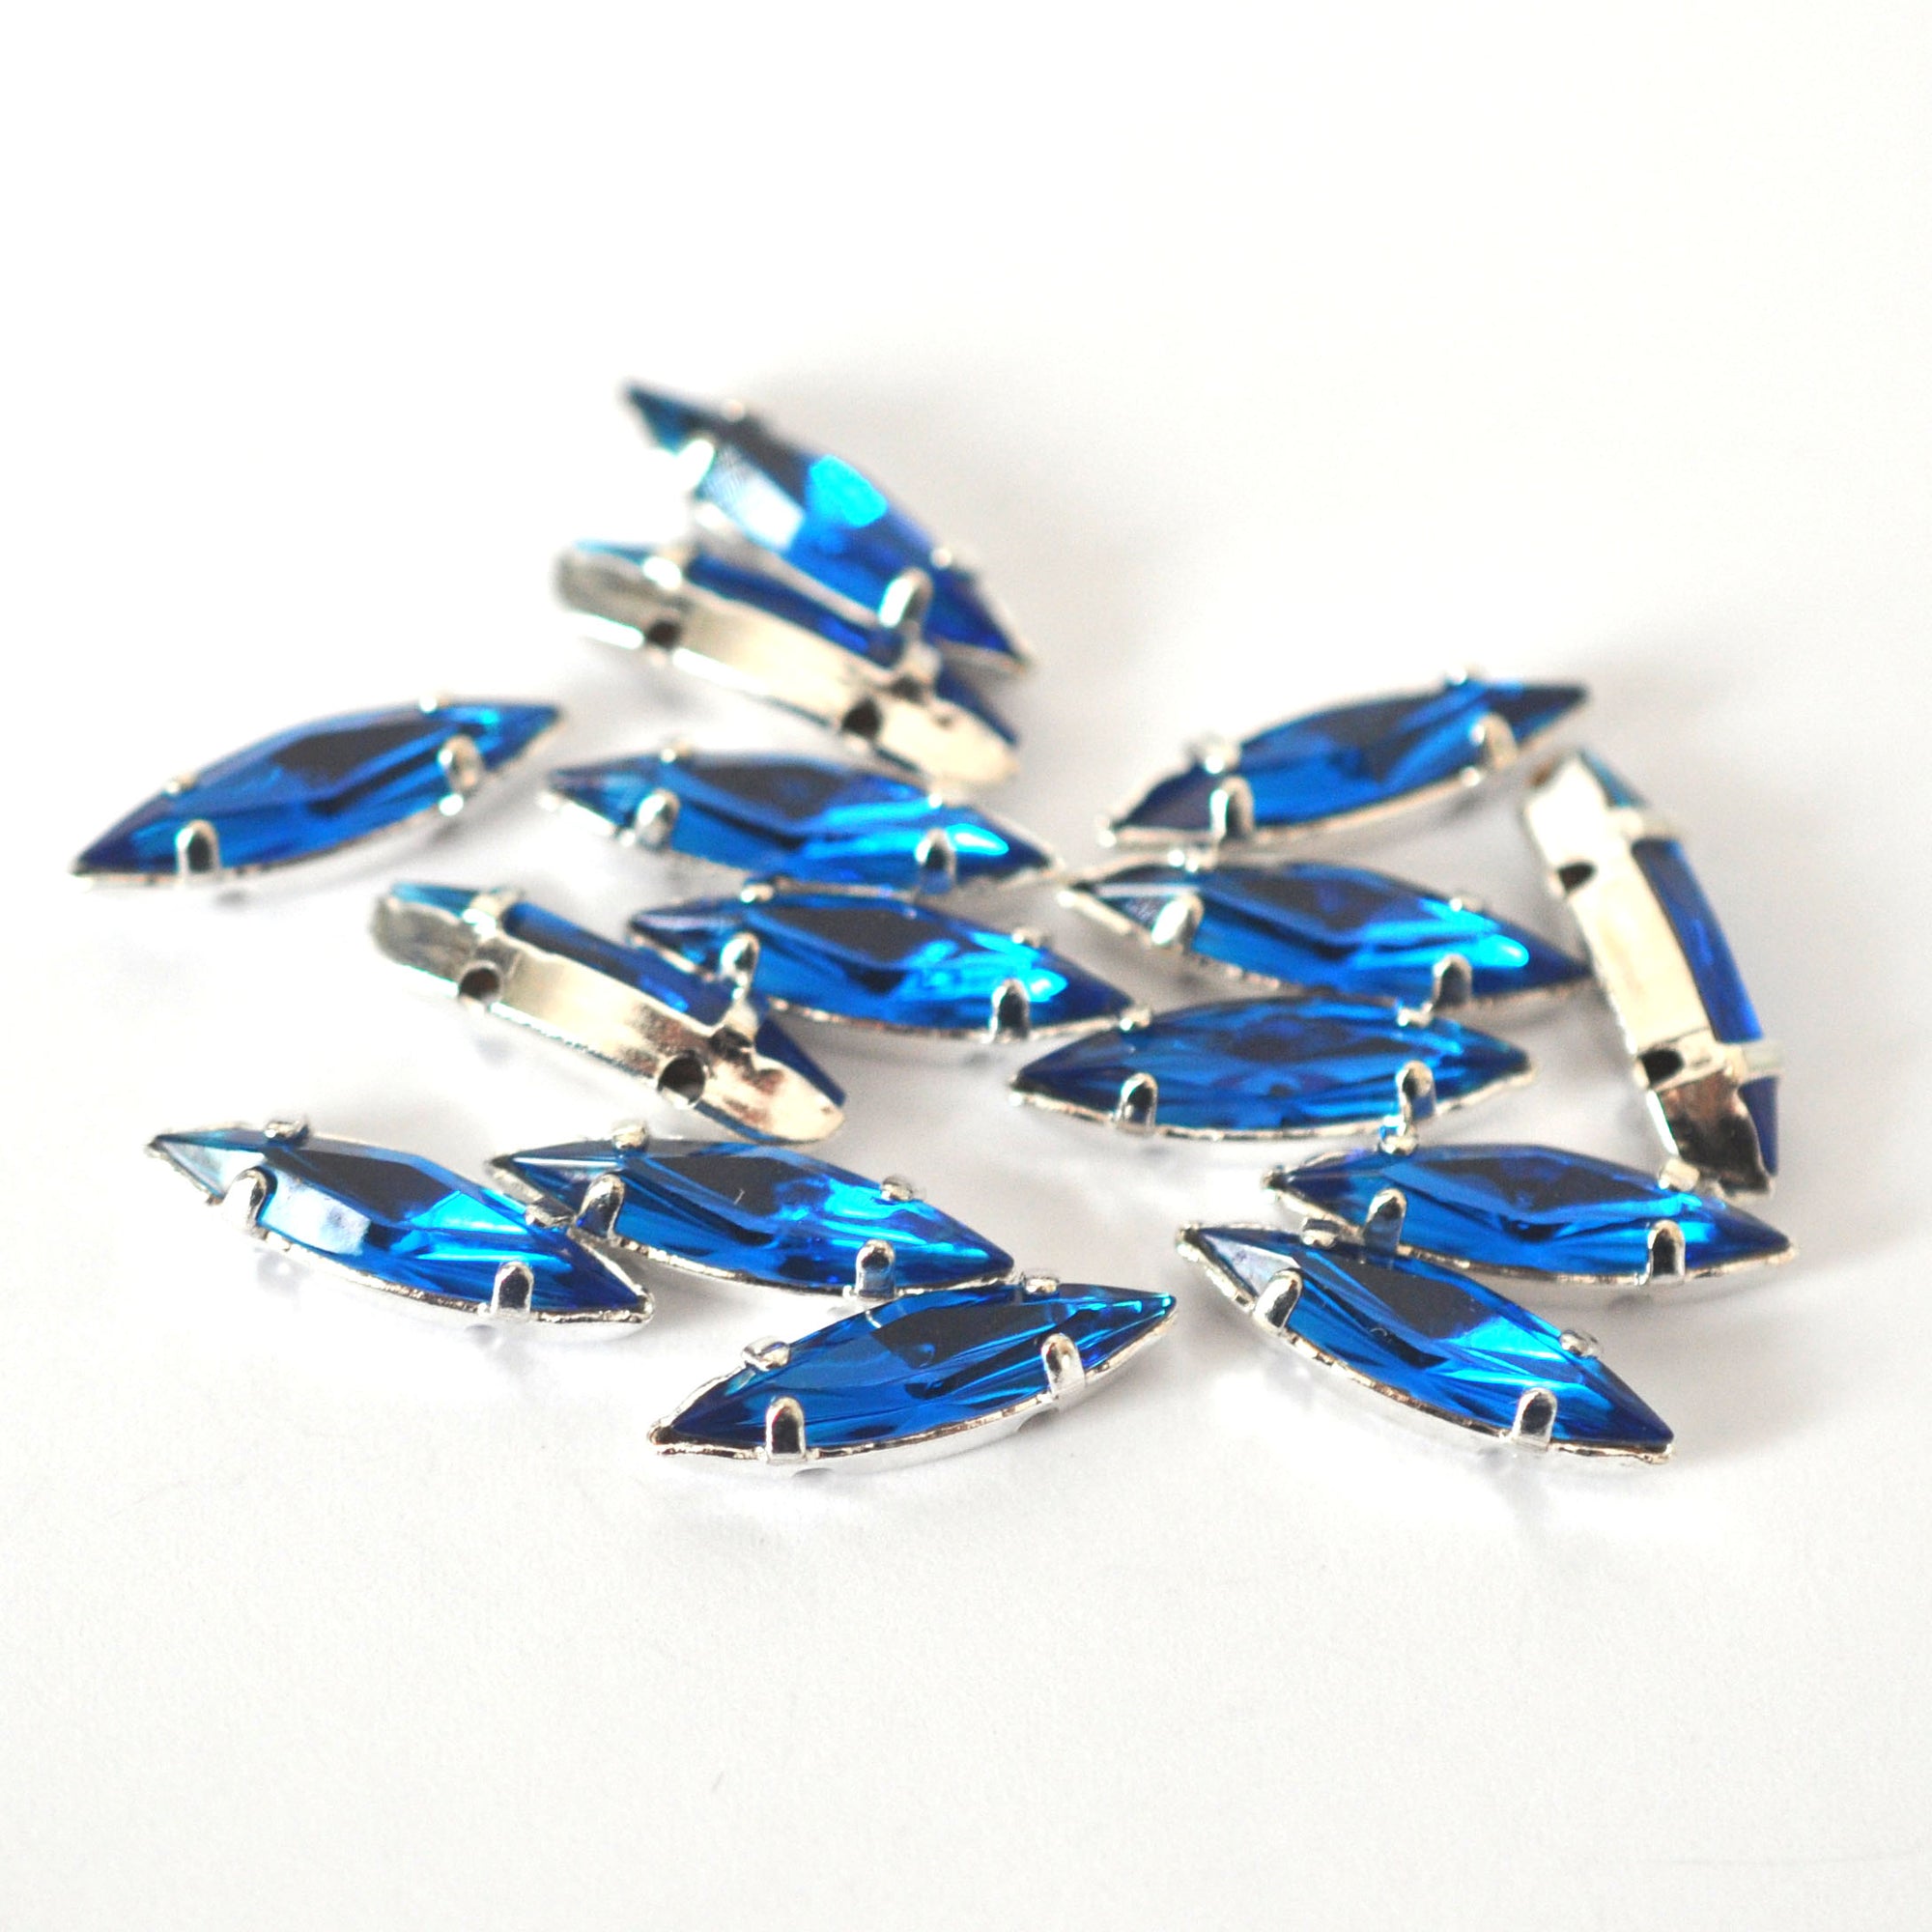 Capri Blue 15x4mm Navette Sew On Crystals - 12 Pieces